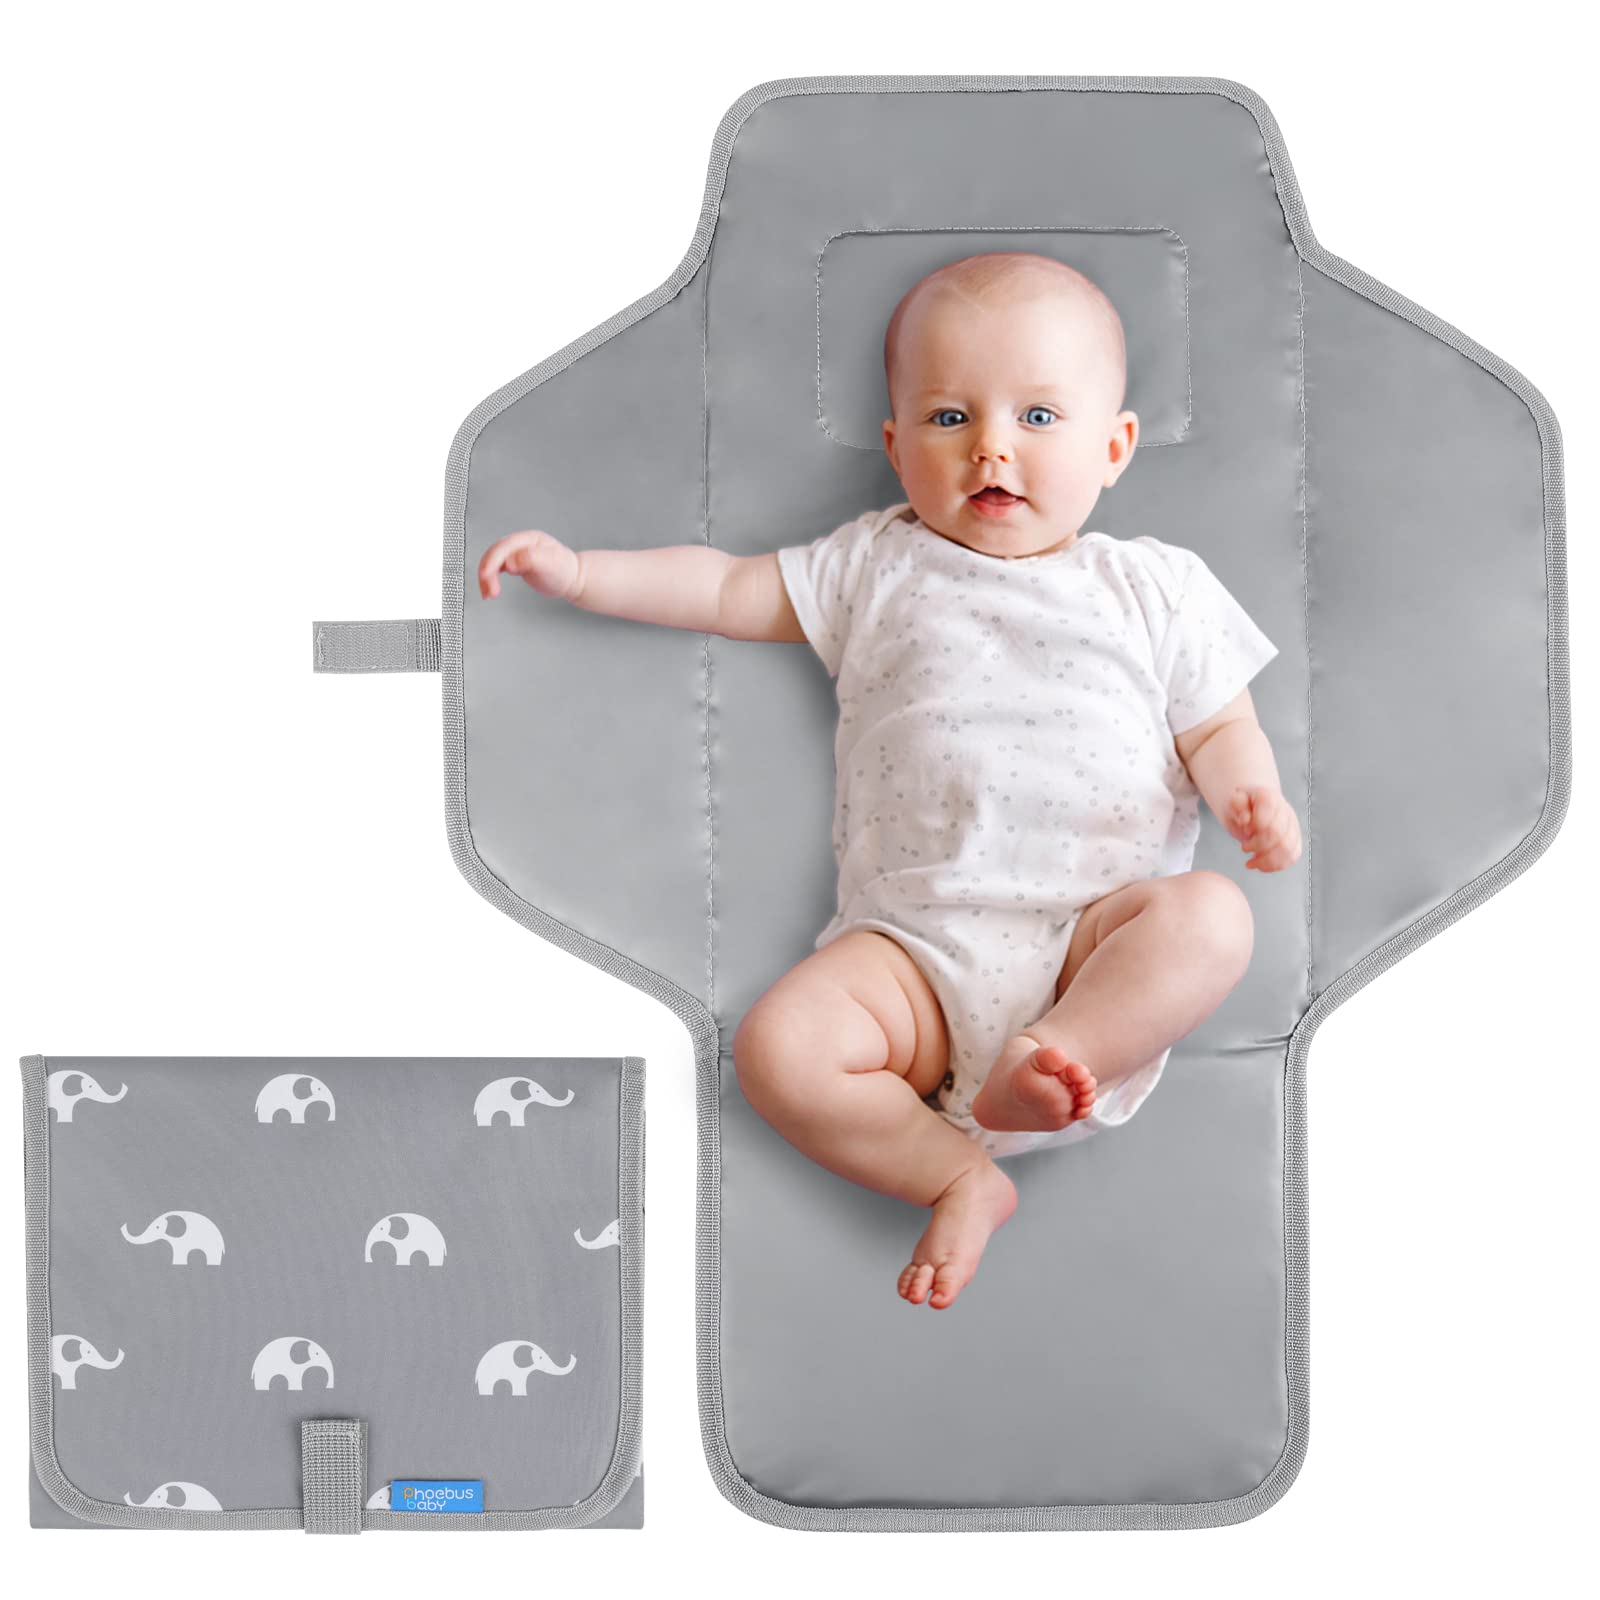 PHOEBUS BABY Portable Changing Pad Travel - Waterproof Compact Diaper Changing Mat with Built-in Pillow - Lightweight & Foldable Changing Station, Newborn Shower Gifts(Cute Elephant)